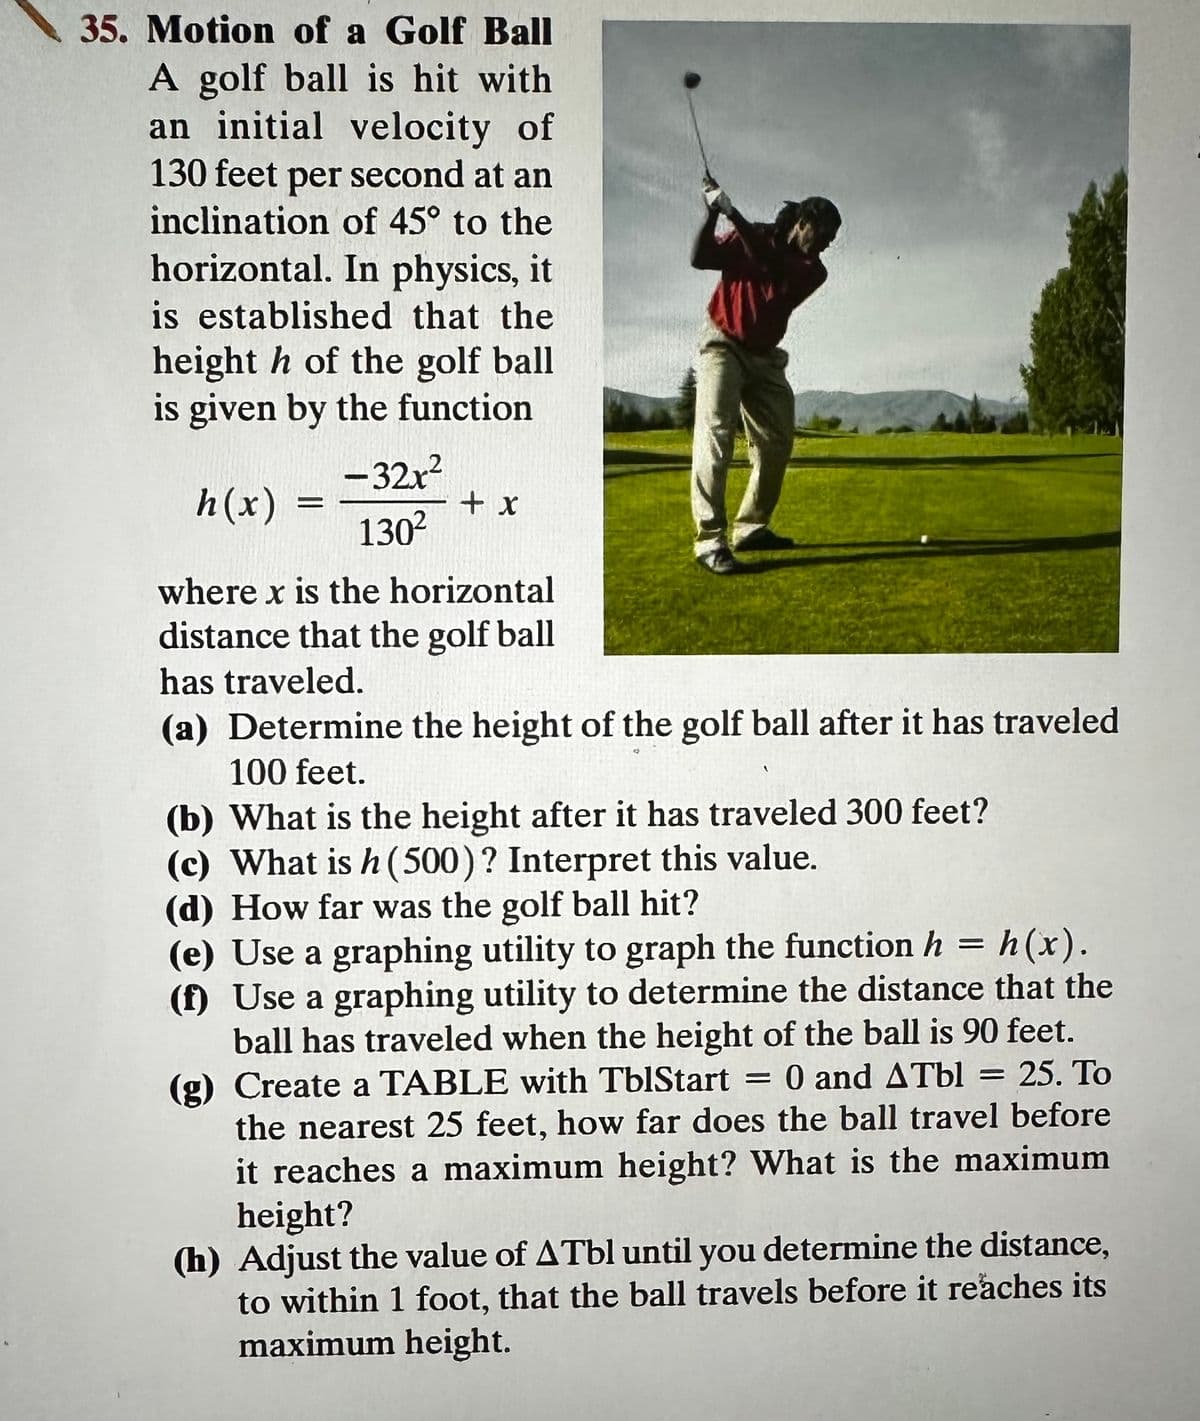 35. Motion of a Golf Ball
A golf ball is hit with
an initial velocity of
130 feet per second at an
inclination of 45° to the
horizontal. In physics, it
is established that the
height h of the golf ball
is given by the function
h(x)
=
-32x²
130²
+ x
where x is the horizontal
distance that the golf ball
has traveled.
(a) Determine the height of the golf ball after it has traveled
100 feet.
(b) What is the height after it has traveled 300 feet?
(c) What is h (500)? Interpret this value.
(d) How far was the golf ball hit?
(e) Use a graphing utility to graph the function h = h(x).
(f) Use a graphing utility to determine the distance that the
ball has traveled when the height of the ball is 90 feet.
0 and ATbl = 25. To
(g) Create a TABLE with TblStart
the nearest 25 feet, how far does the ball travel before
it reaches a maximum height? What is the maximum
height?
(h) Adjust the value of ATbl until you determine the distance,
to within 1 foot, that the ball travels before it reaches its
maximum height.